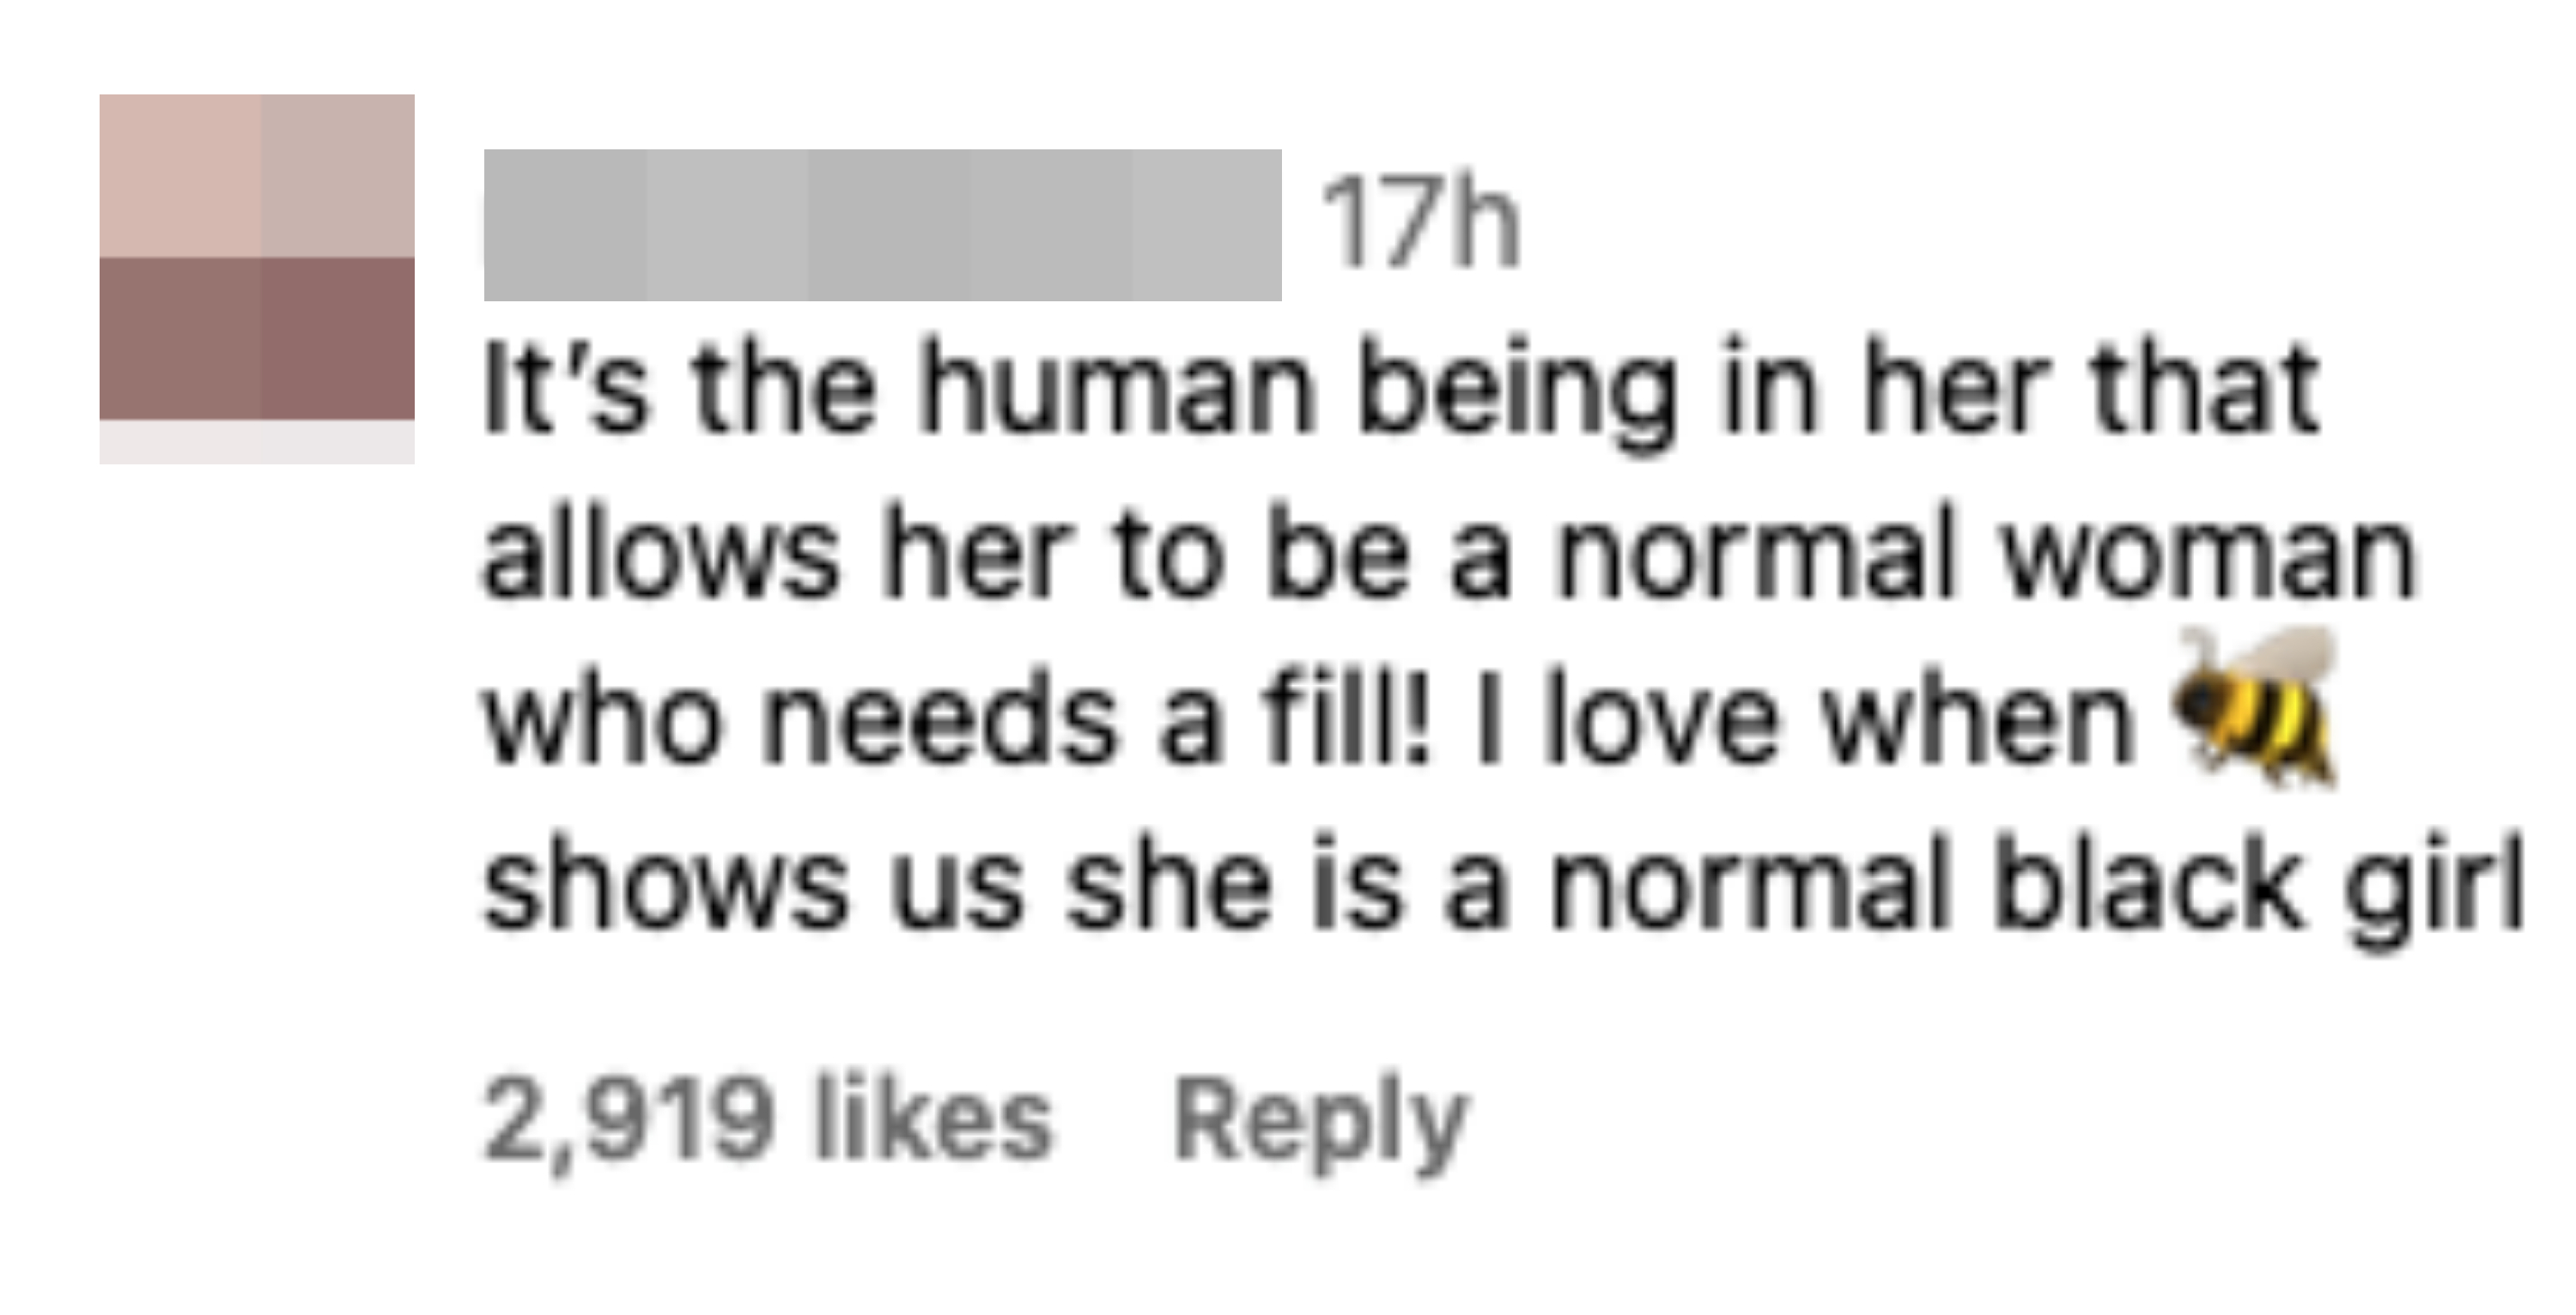 It’s the human being in her that allows her to be a normal woman who needs a fill